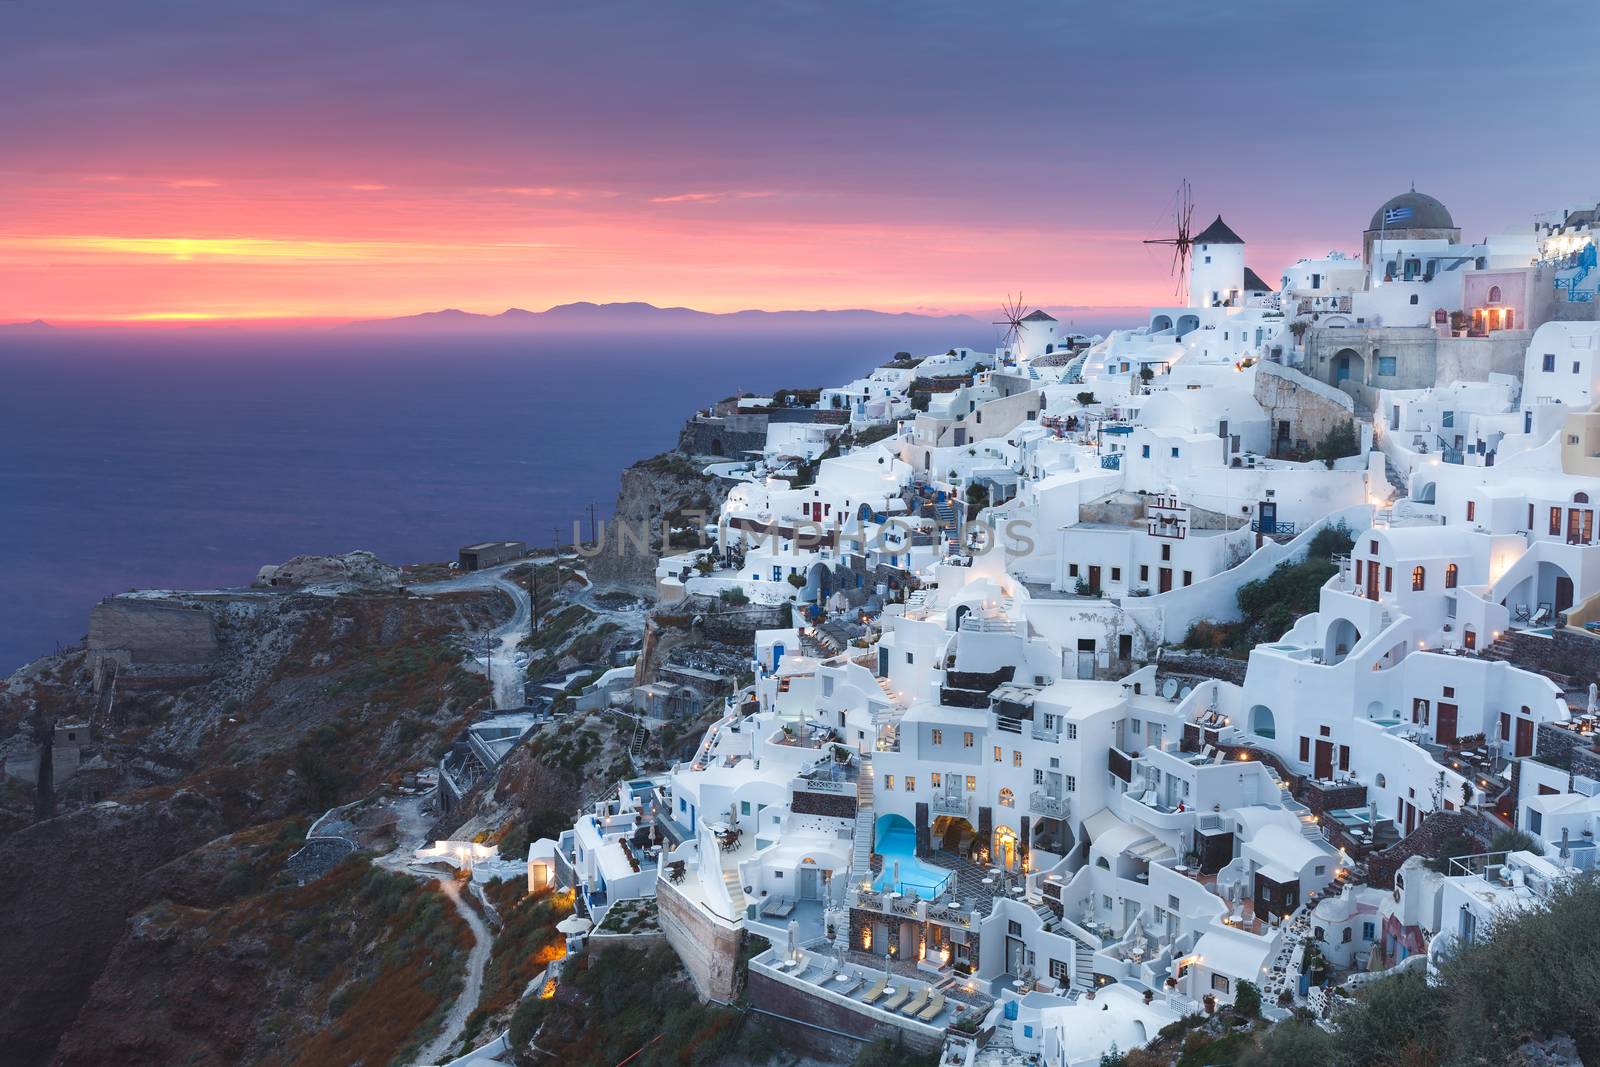 Landscape of beautiful world famous  village of Oia, just after sunset, Santorini, Greece by Slast20